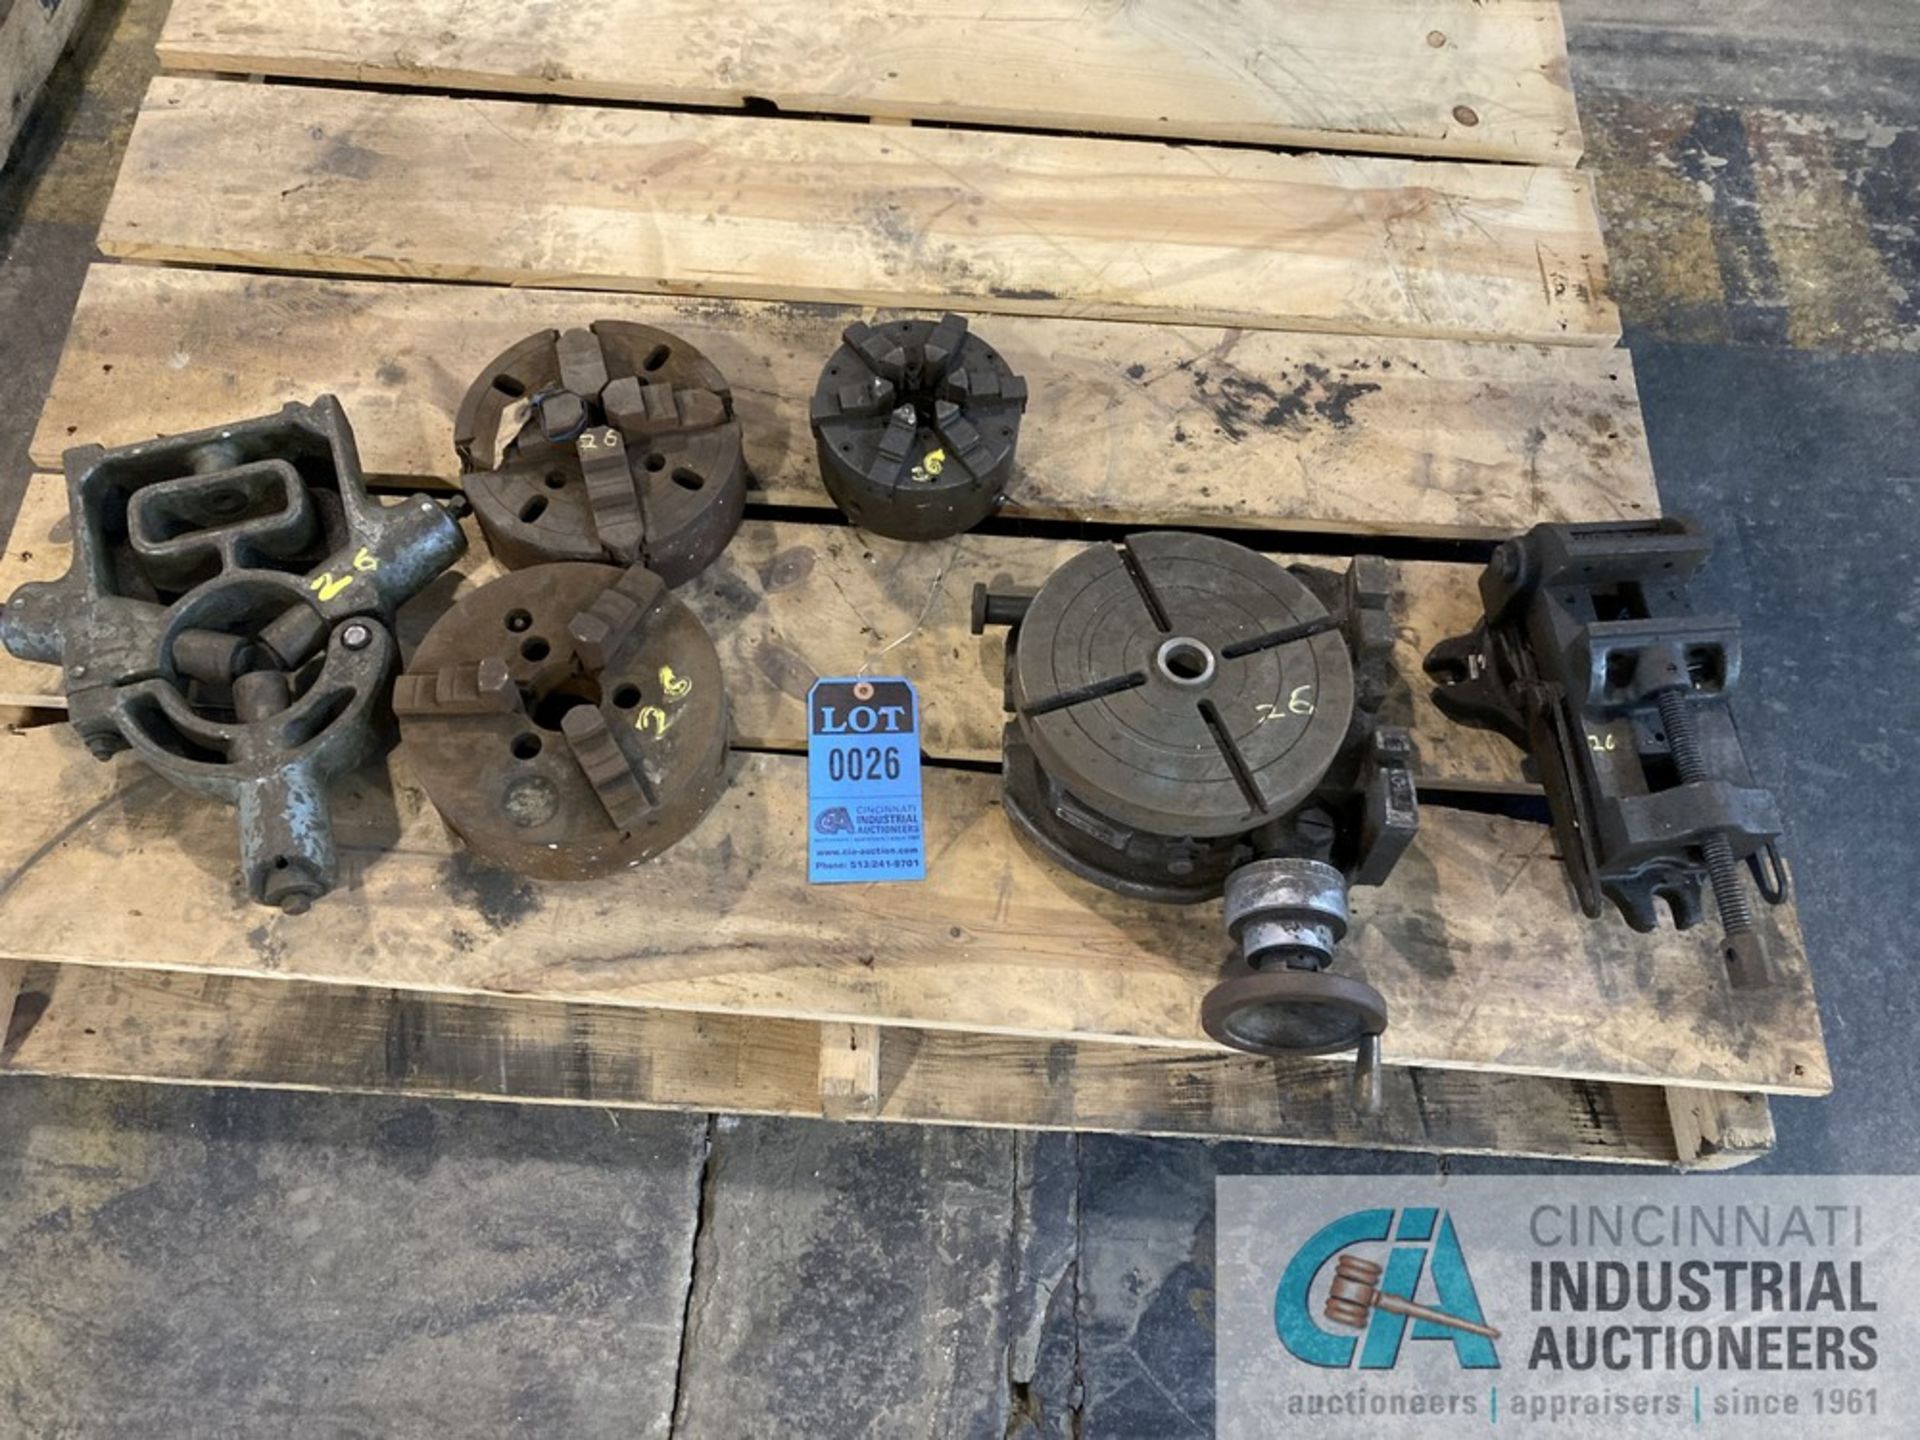 (LOT) MACHINE TOOL ACCESSORIES ON SKID; 9" ROTARY TABLE, 4" COMPOUND VISE, TAILSTOCK, (3) LATHE